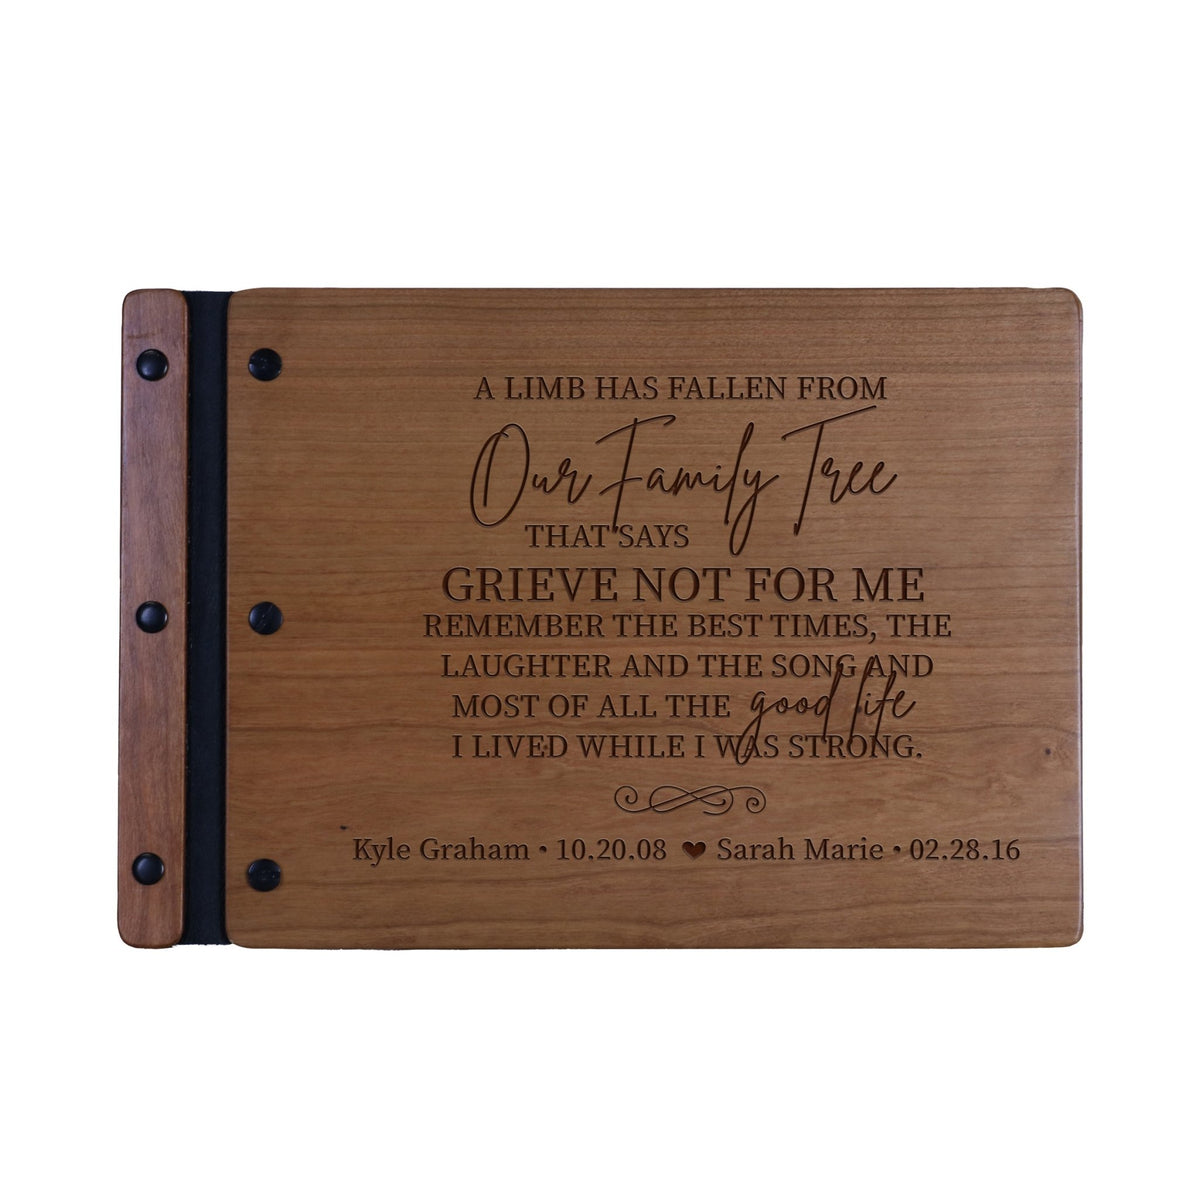 Personalized Wooden Memorial Guestbook 12.375” x 8.5” x .75” - A Limb Has Fallen - LifeSong Milestones